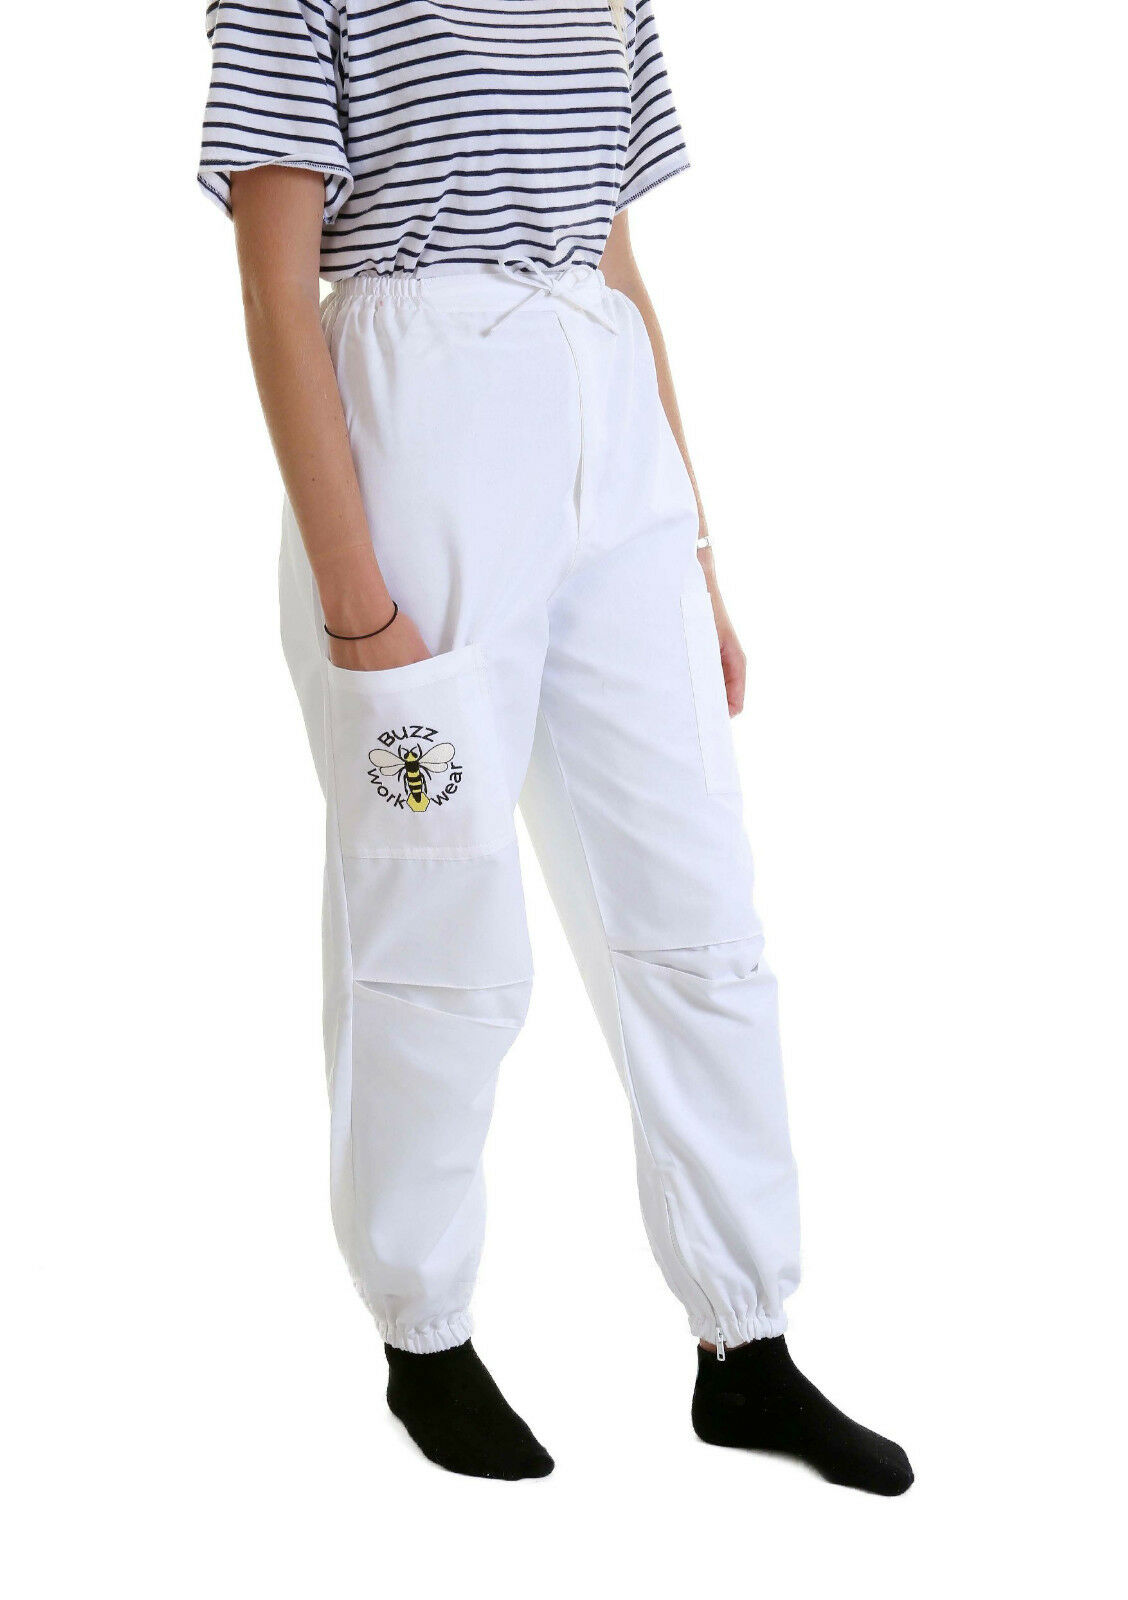 Beekeepers White Trousers- Choose Your Size